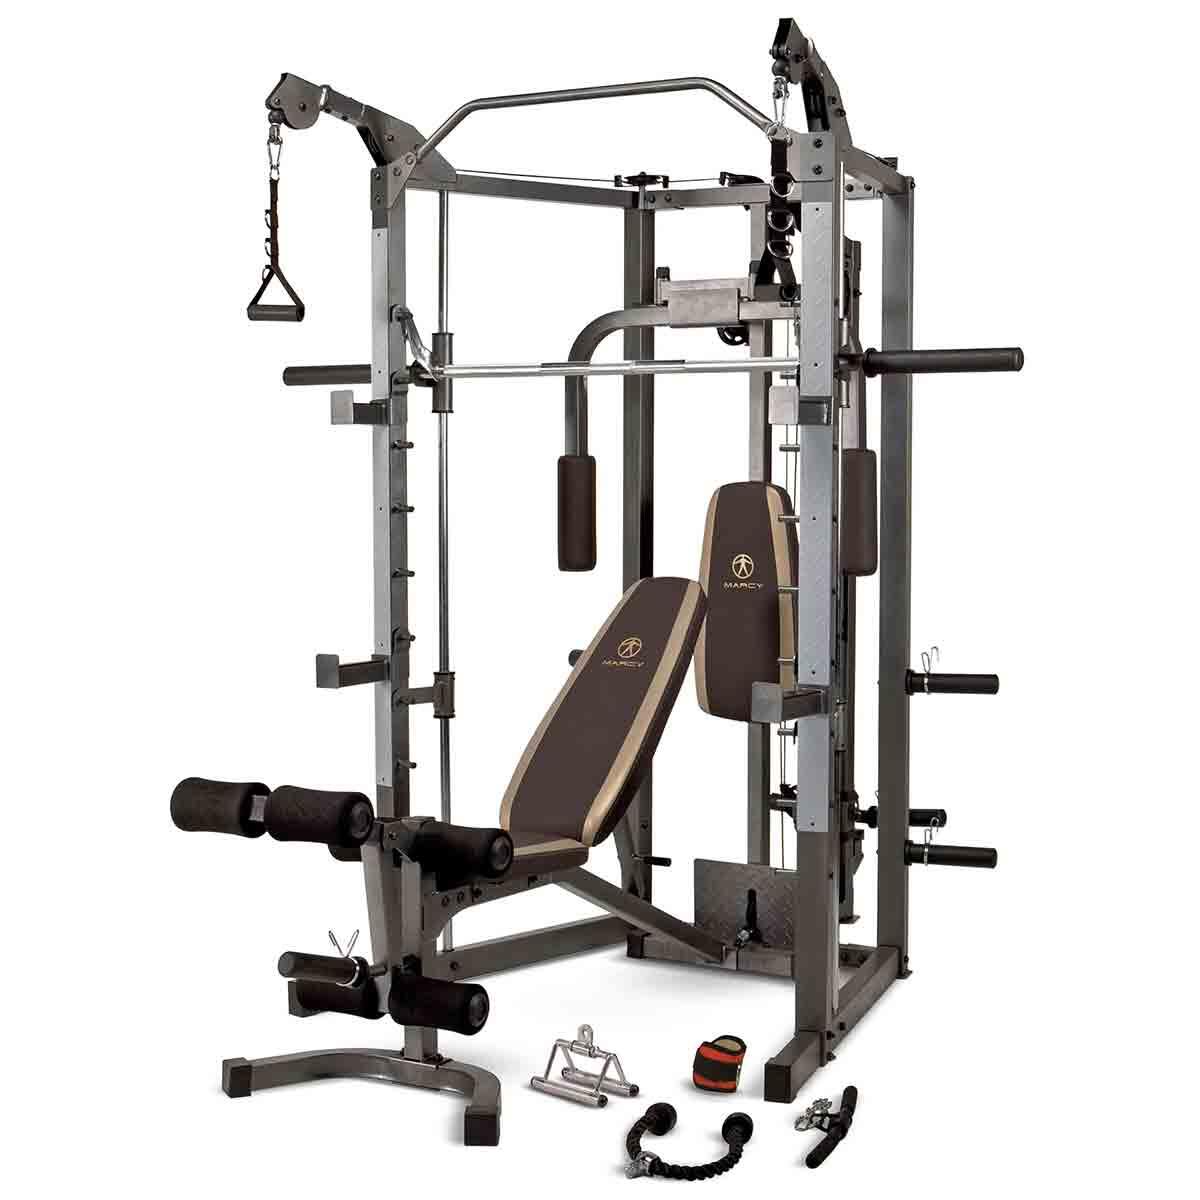 MARCY MARCY SM4008 DELUXE SMITH MACHINE HOME GYM WITH WEIGHT BENCH